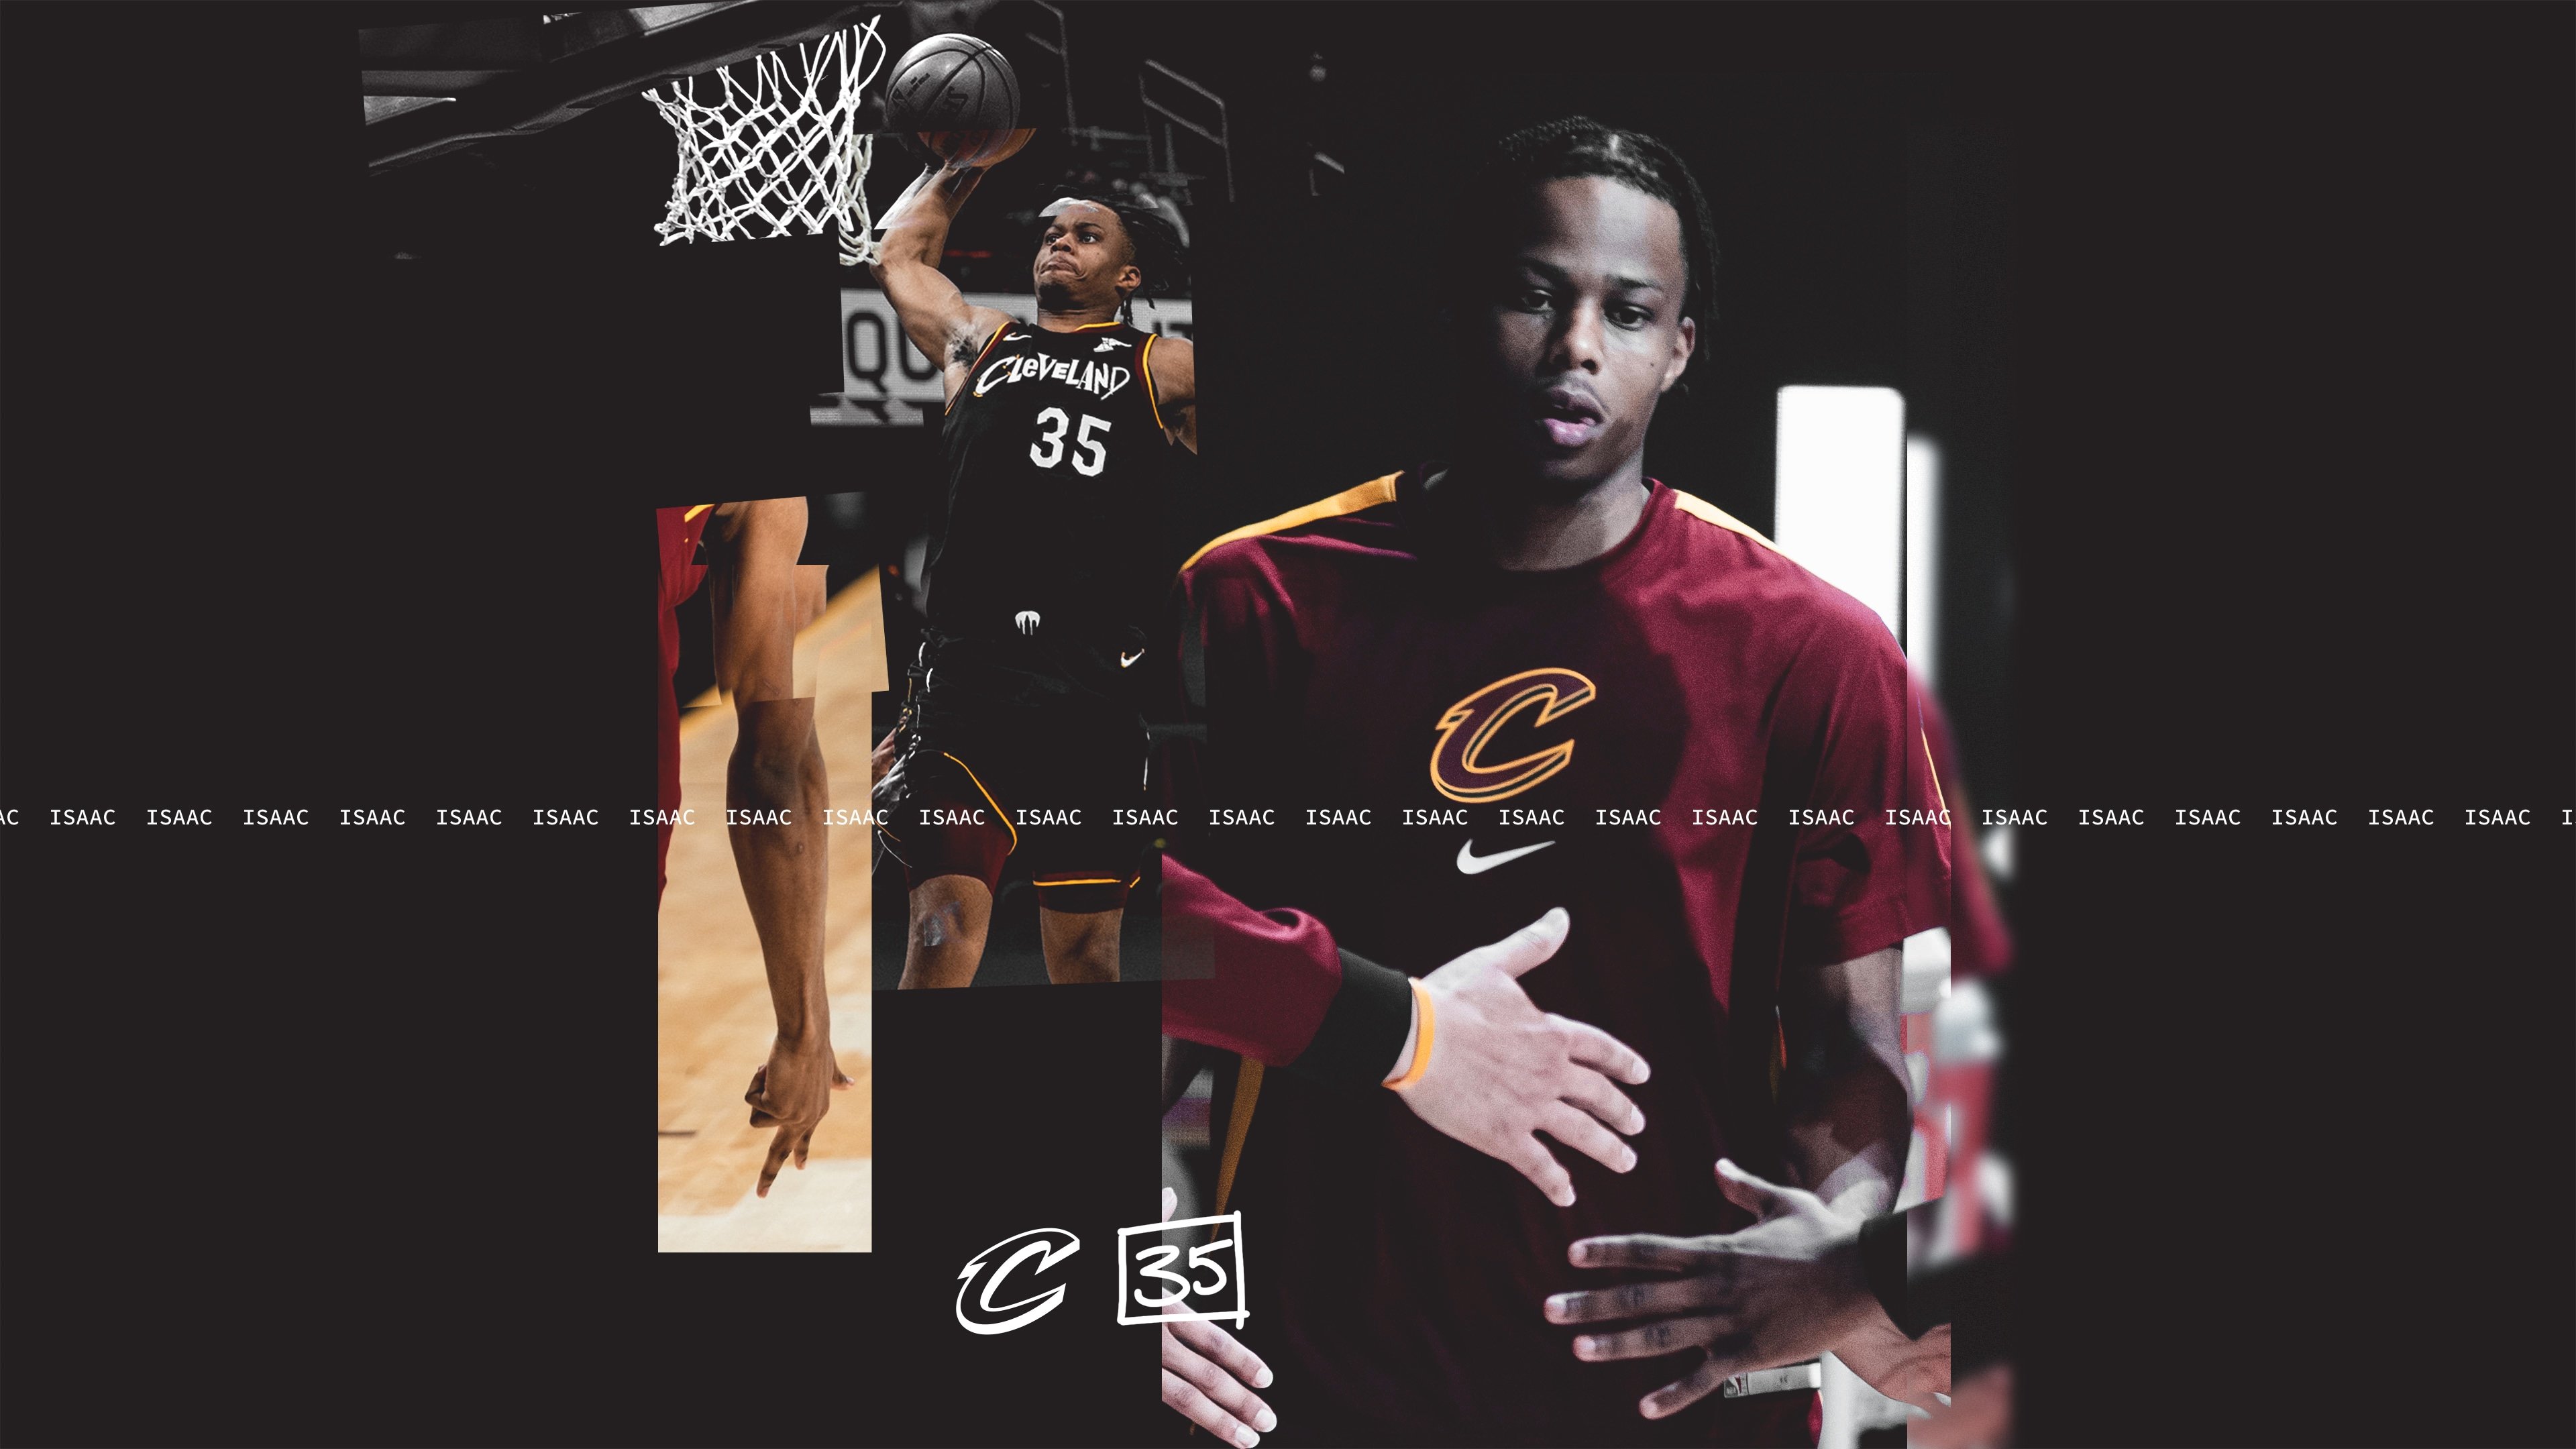 CLEVELAND Cavaliers15 Wallpaper by AlpGraphic13 on DeviantArt